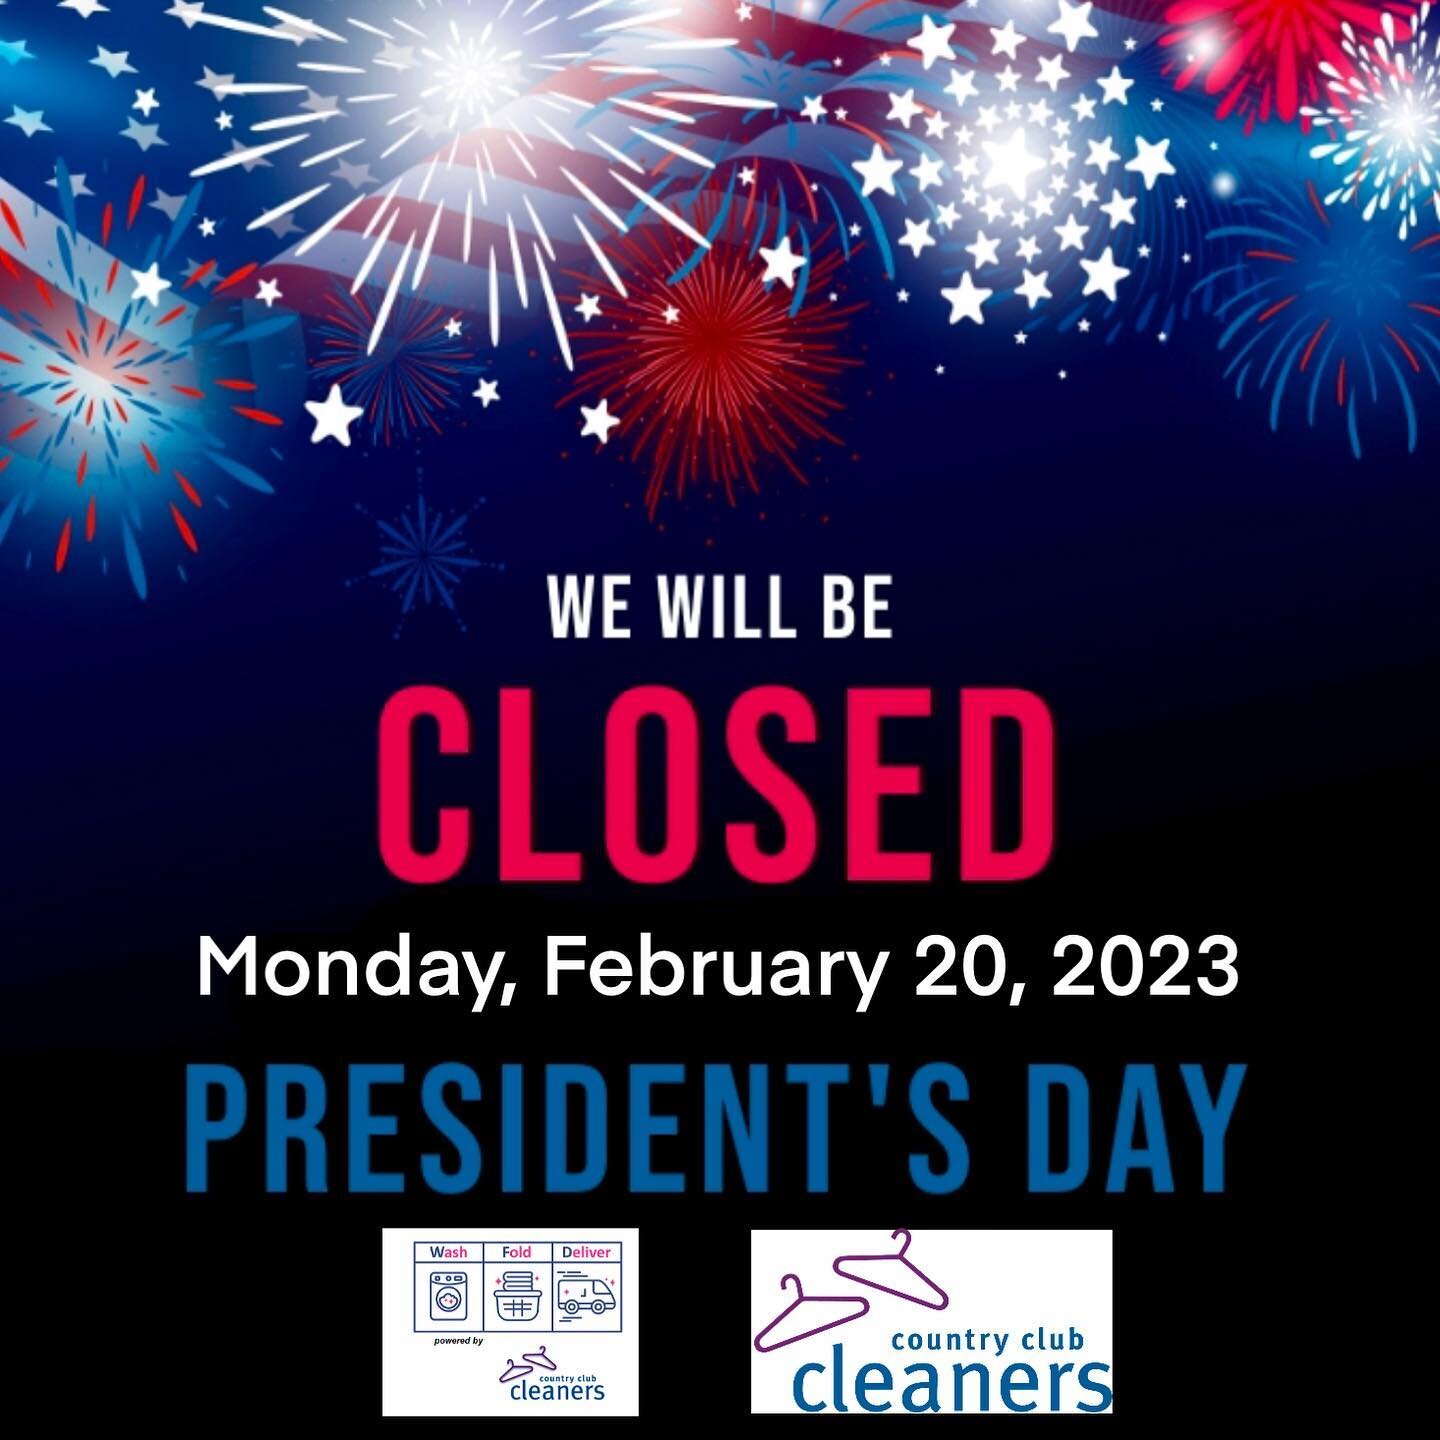 Country Club Cleaners/Wash, Fold, Deliver will be closed on Monday, February 20th for President&rsquo;s Day.  We will be back open for regular hours on Tuesday and drivers will be out picking up and delivering.